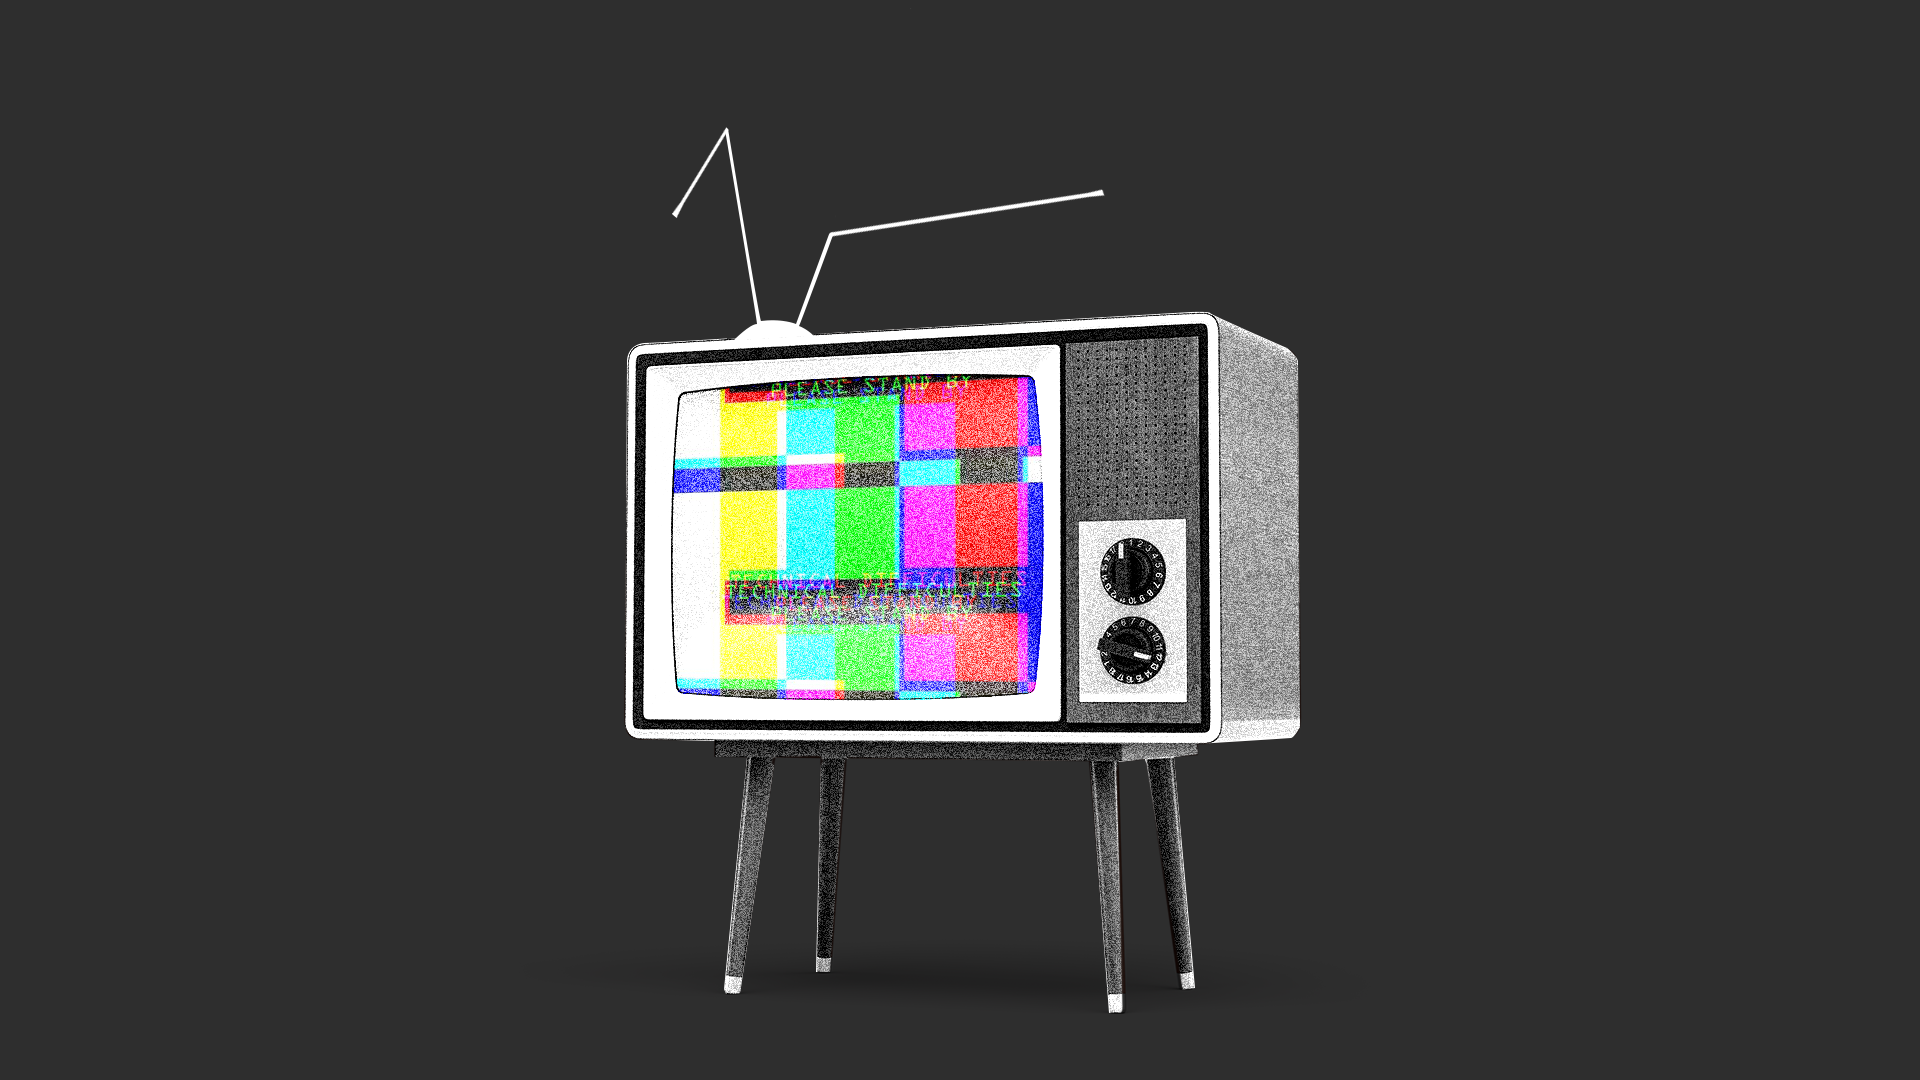 An illustration showing a TV outage